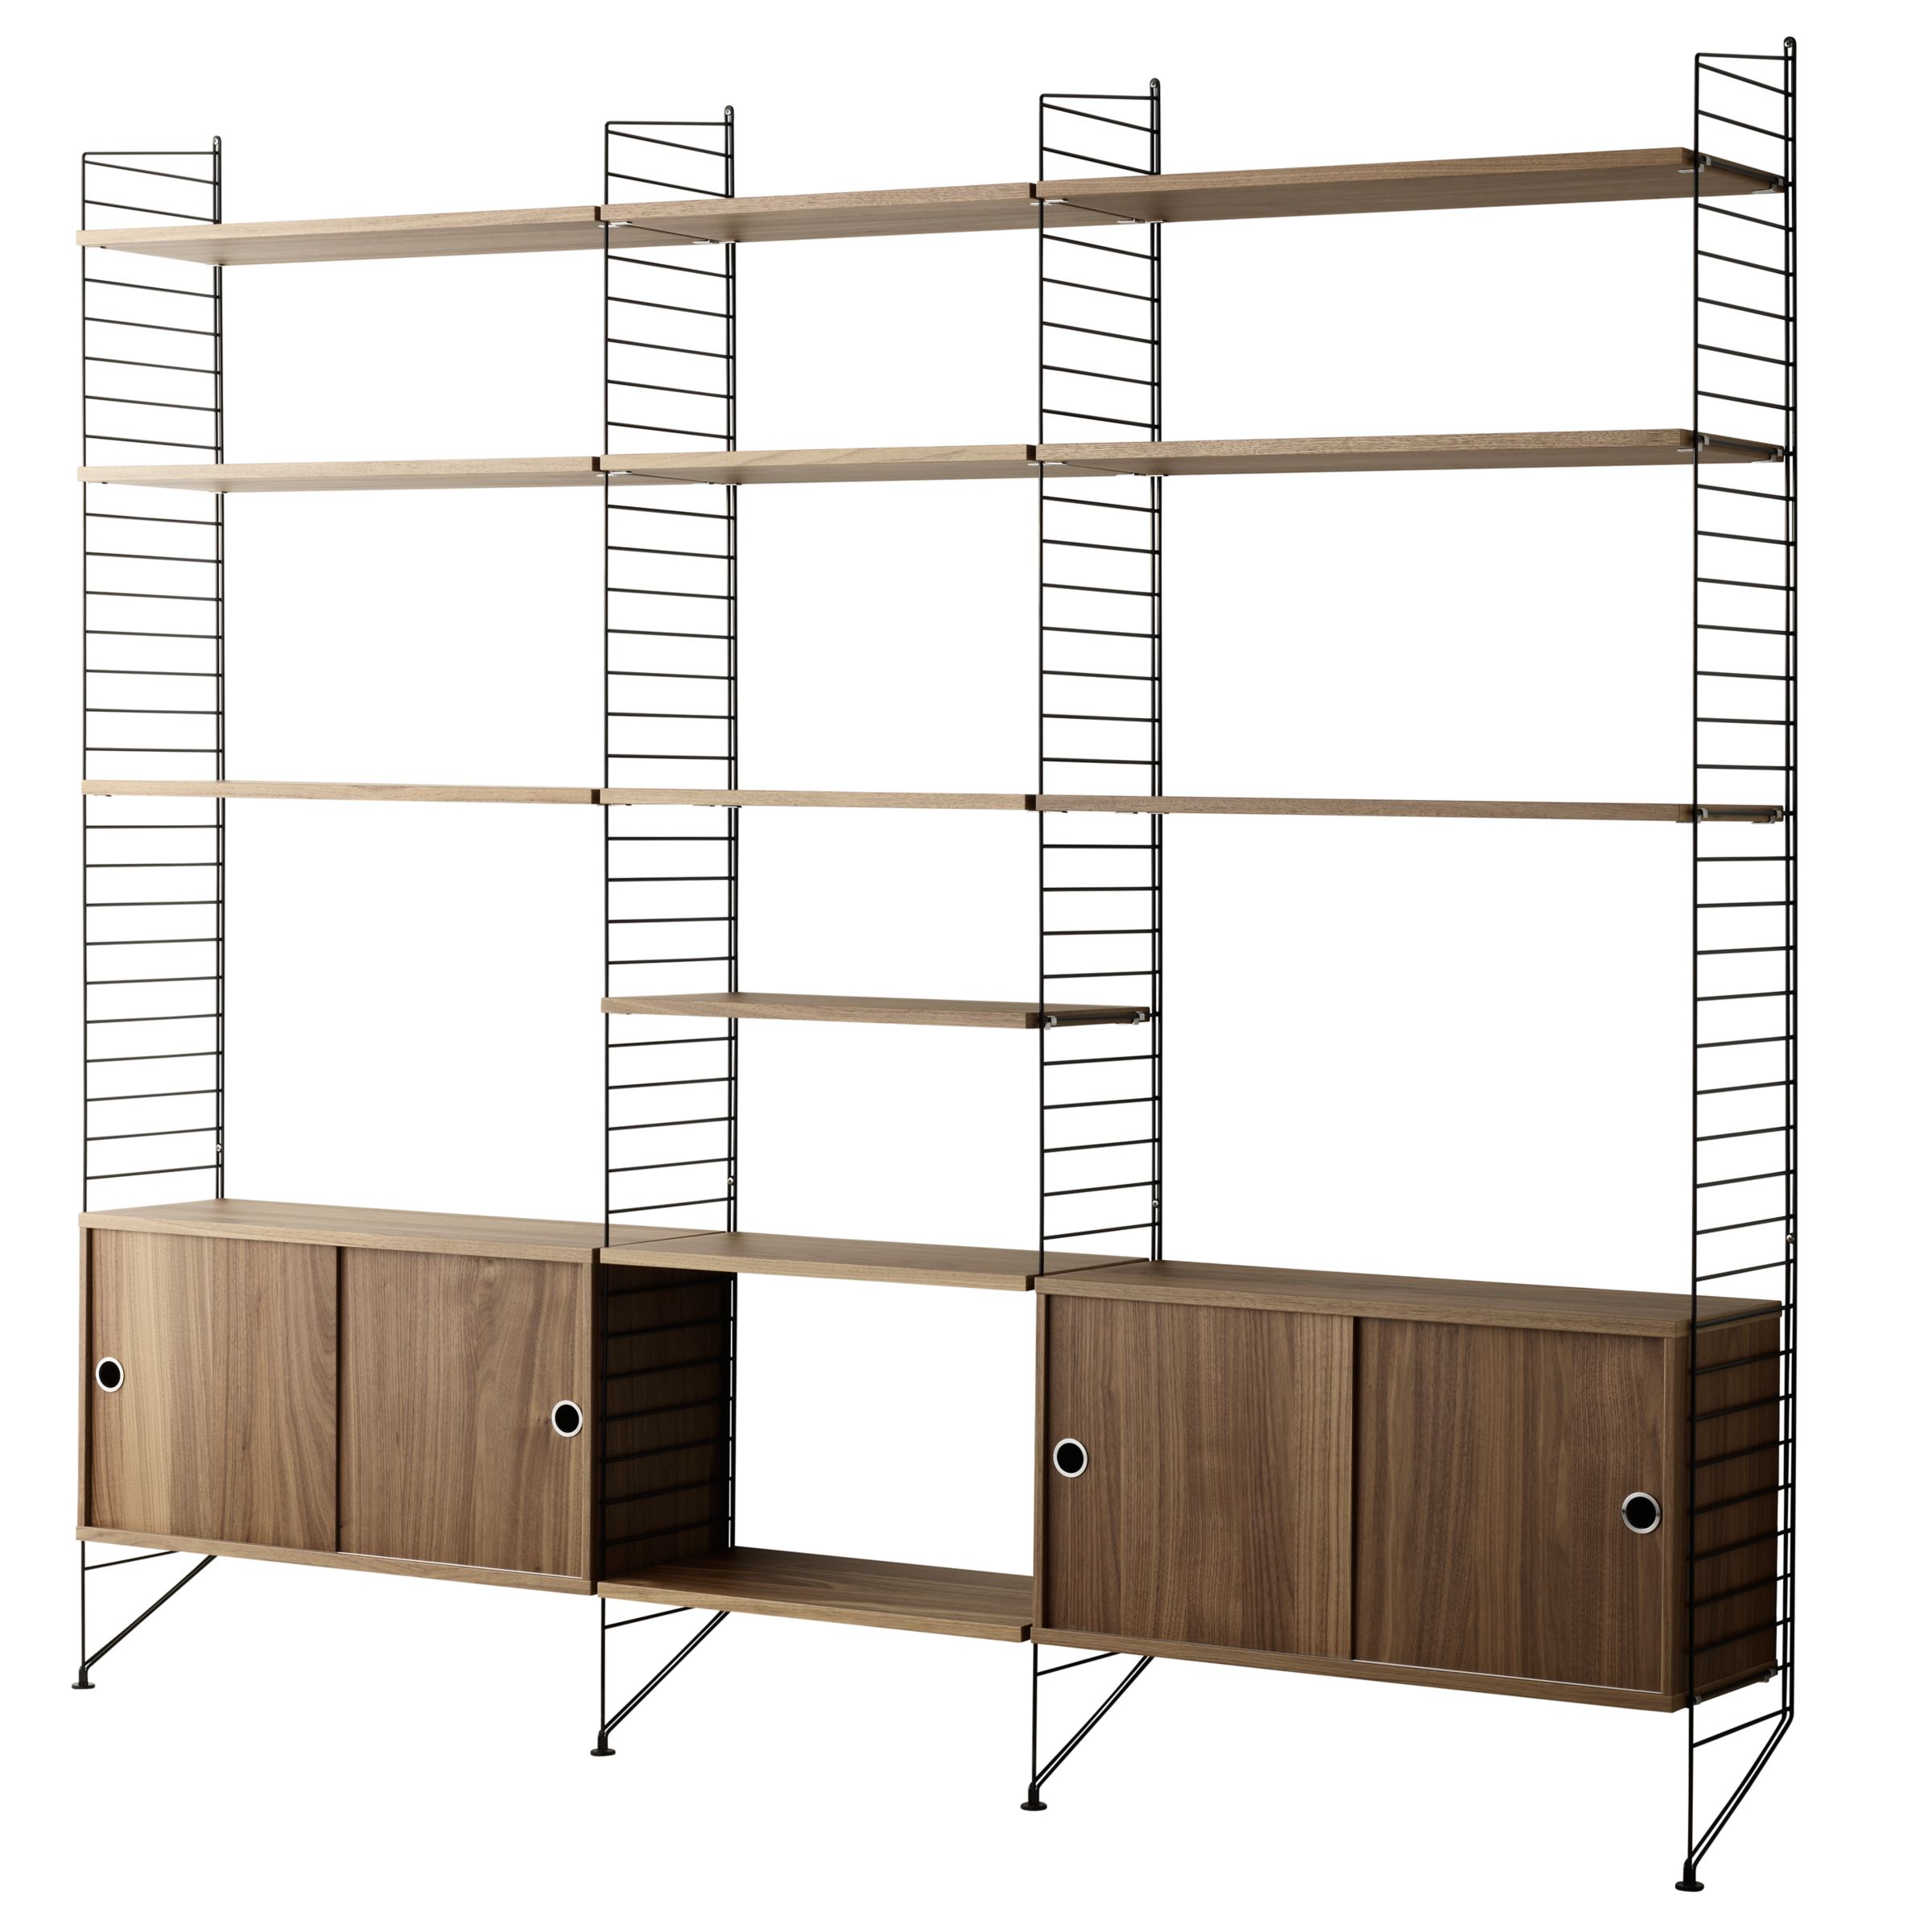 Shelving Unit With Double Cabinets, Wall Cabinets And Shelves